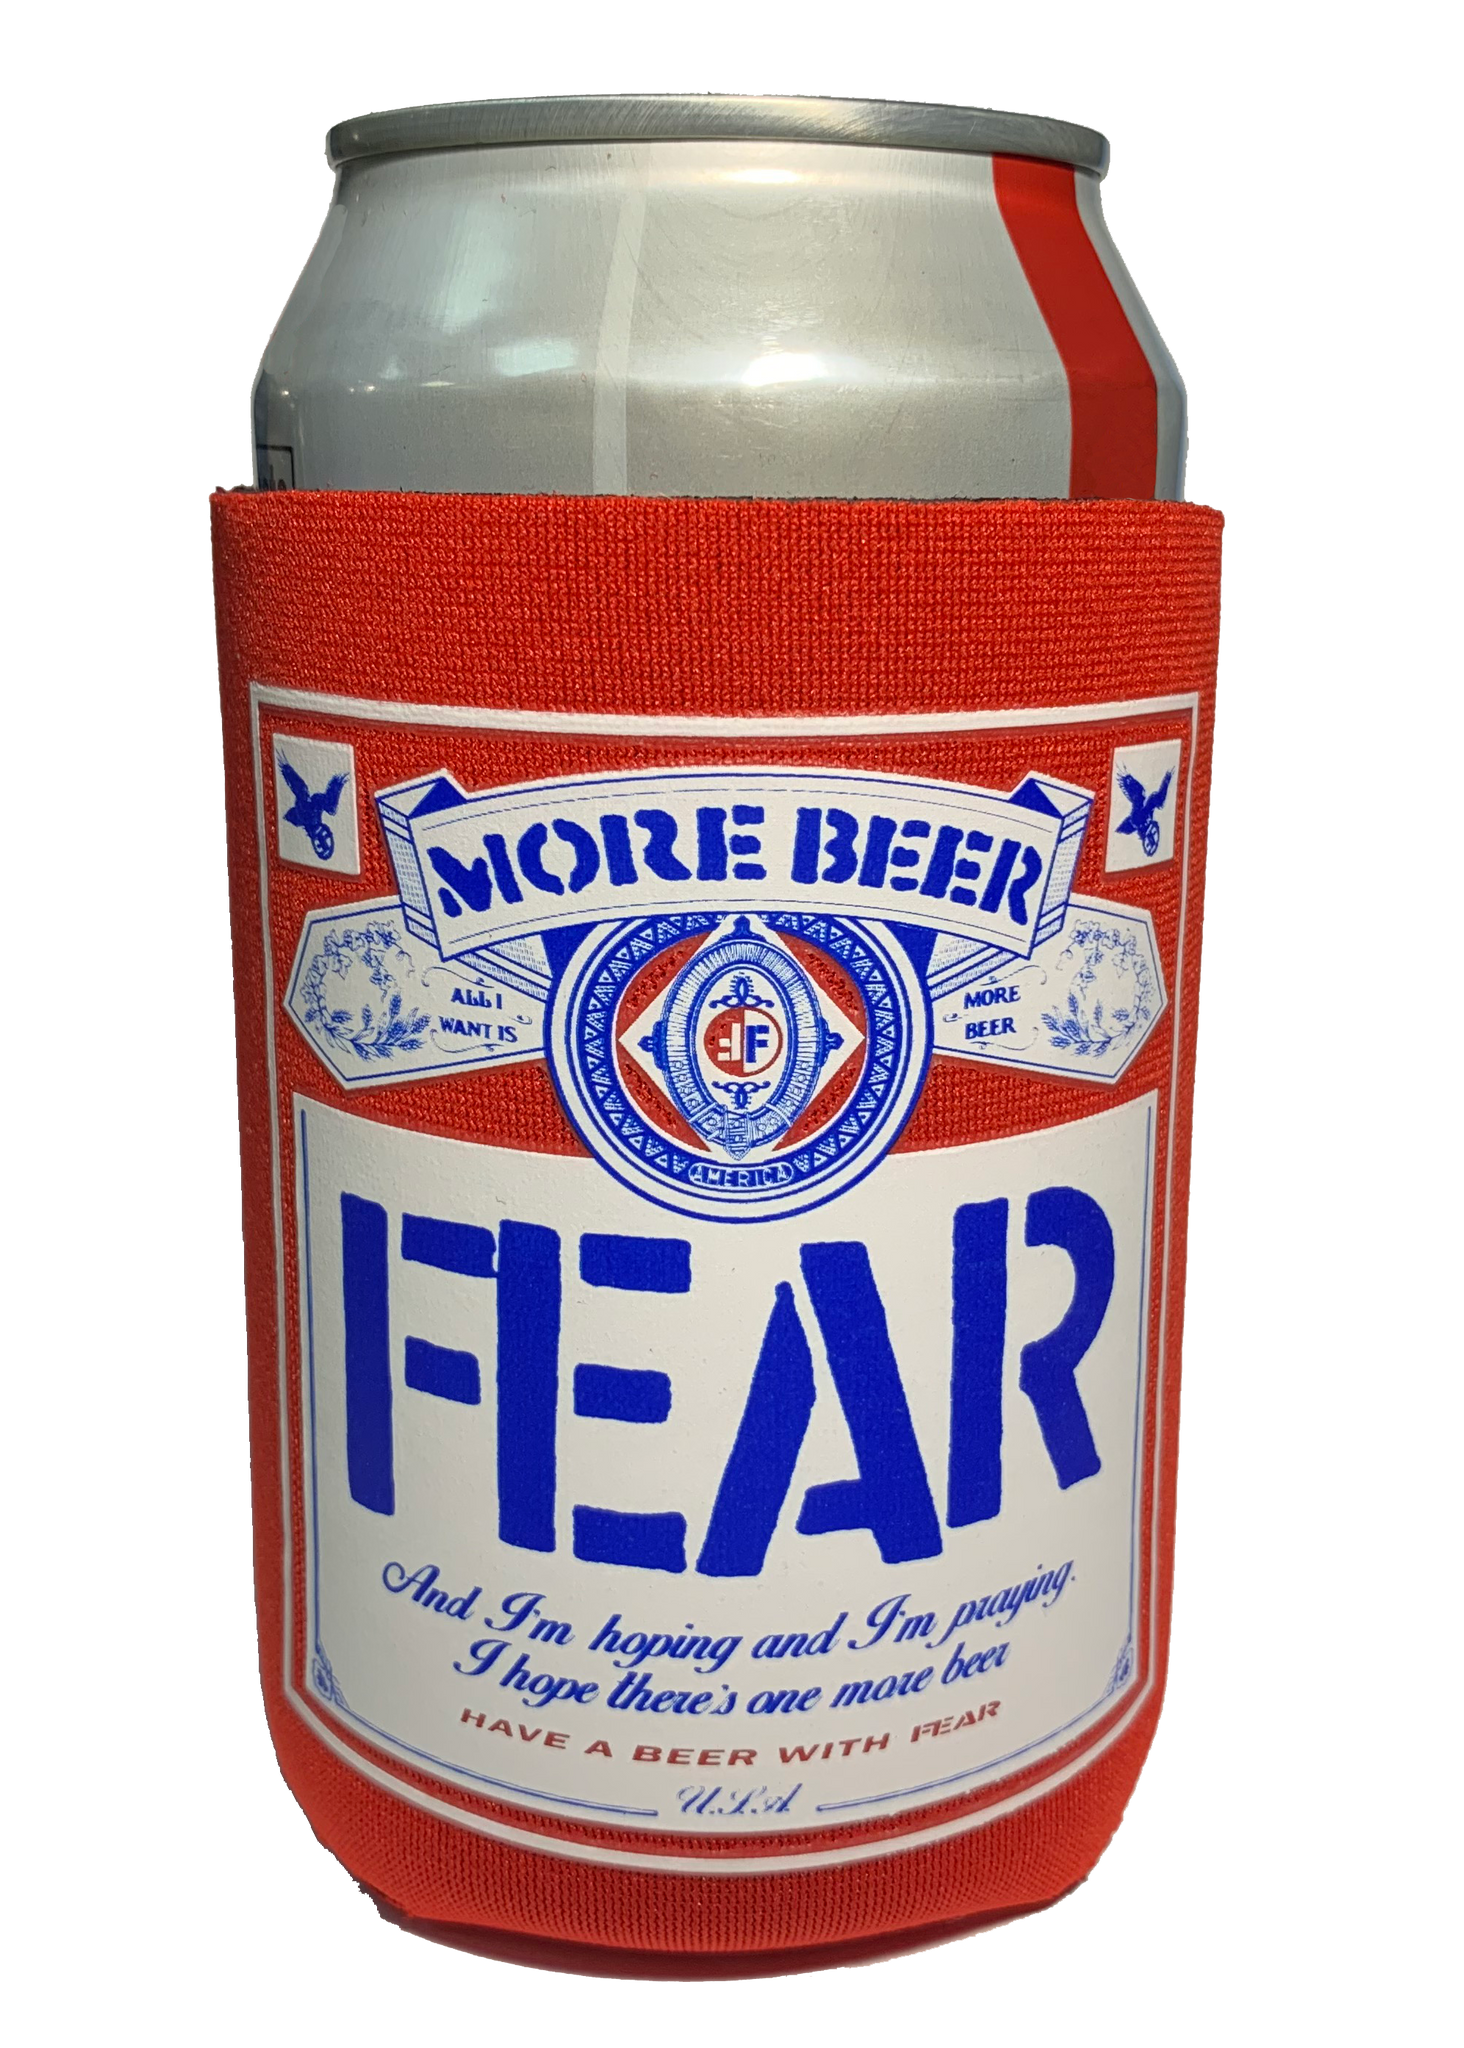 FEAR "MORE BEER" CAN AND BOTTLE INSULATOR